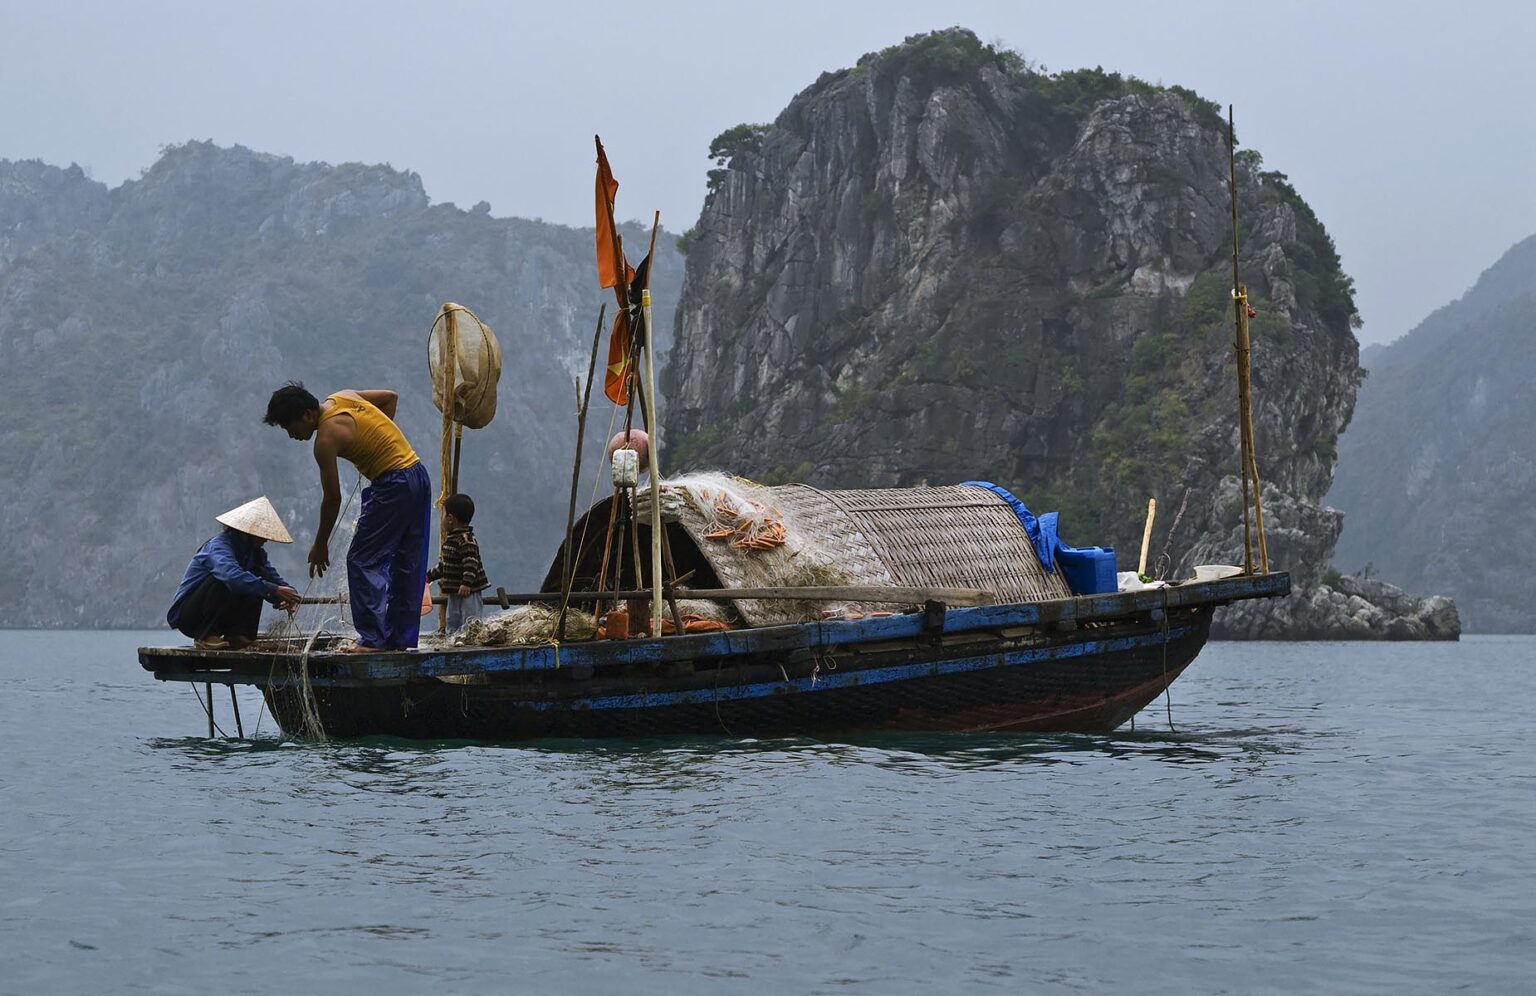 FISHERMEN at work in the waters of HALONG BAY - VIETNAM